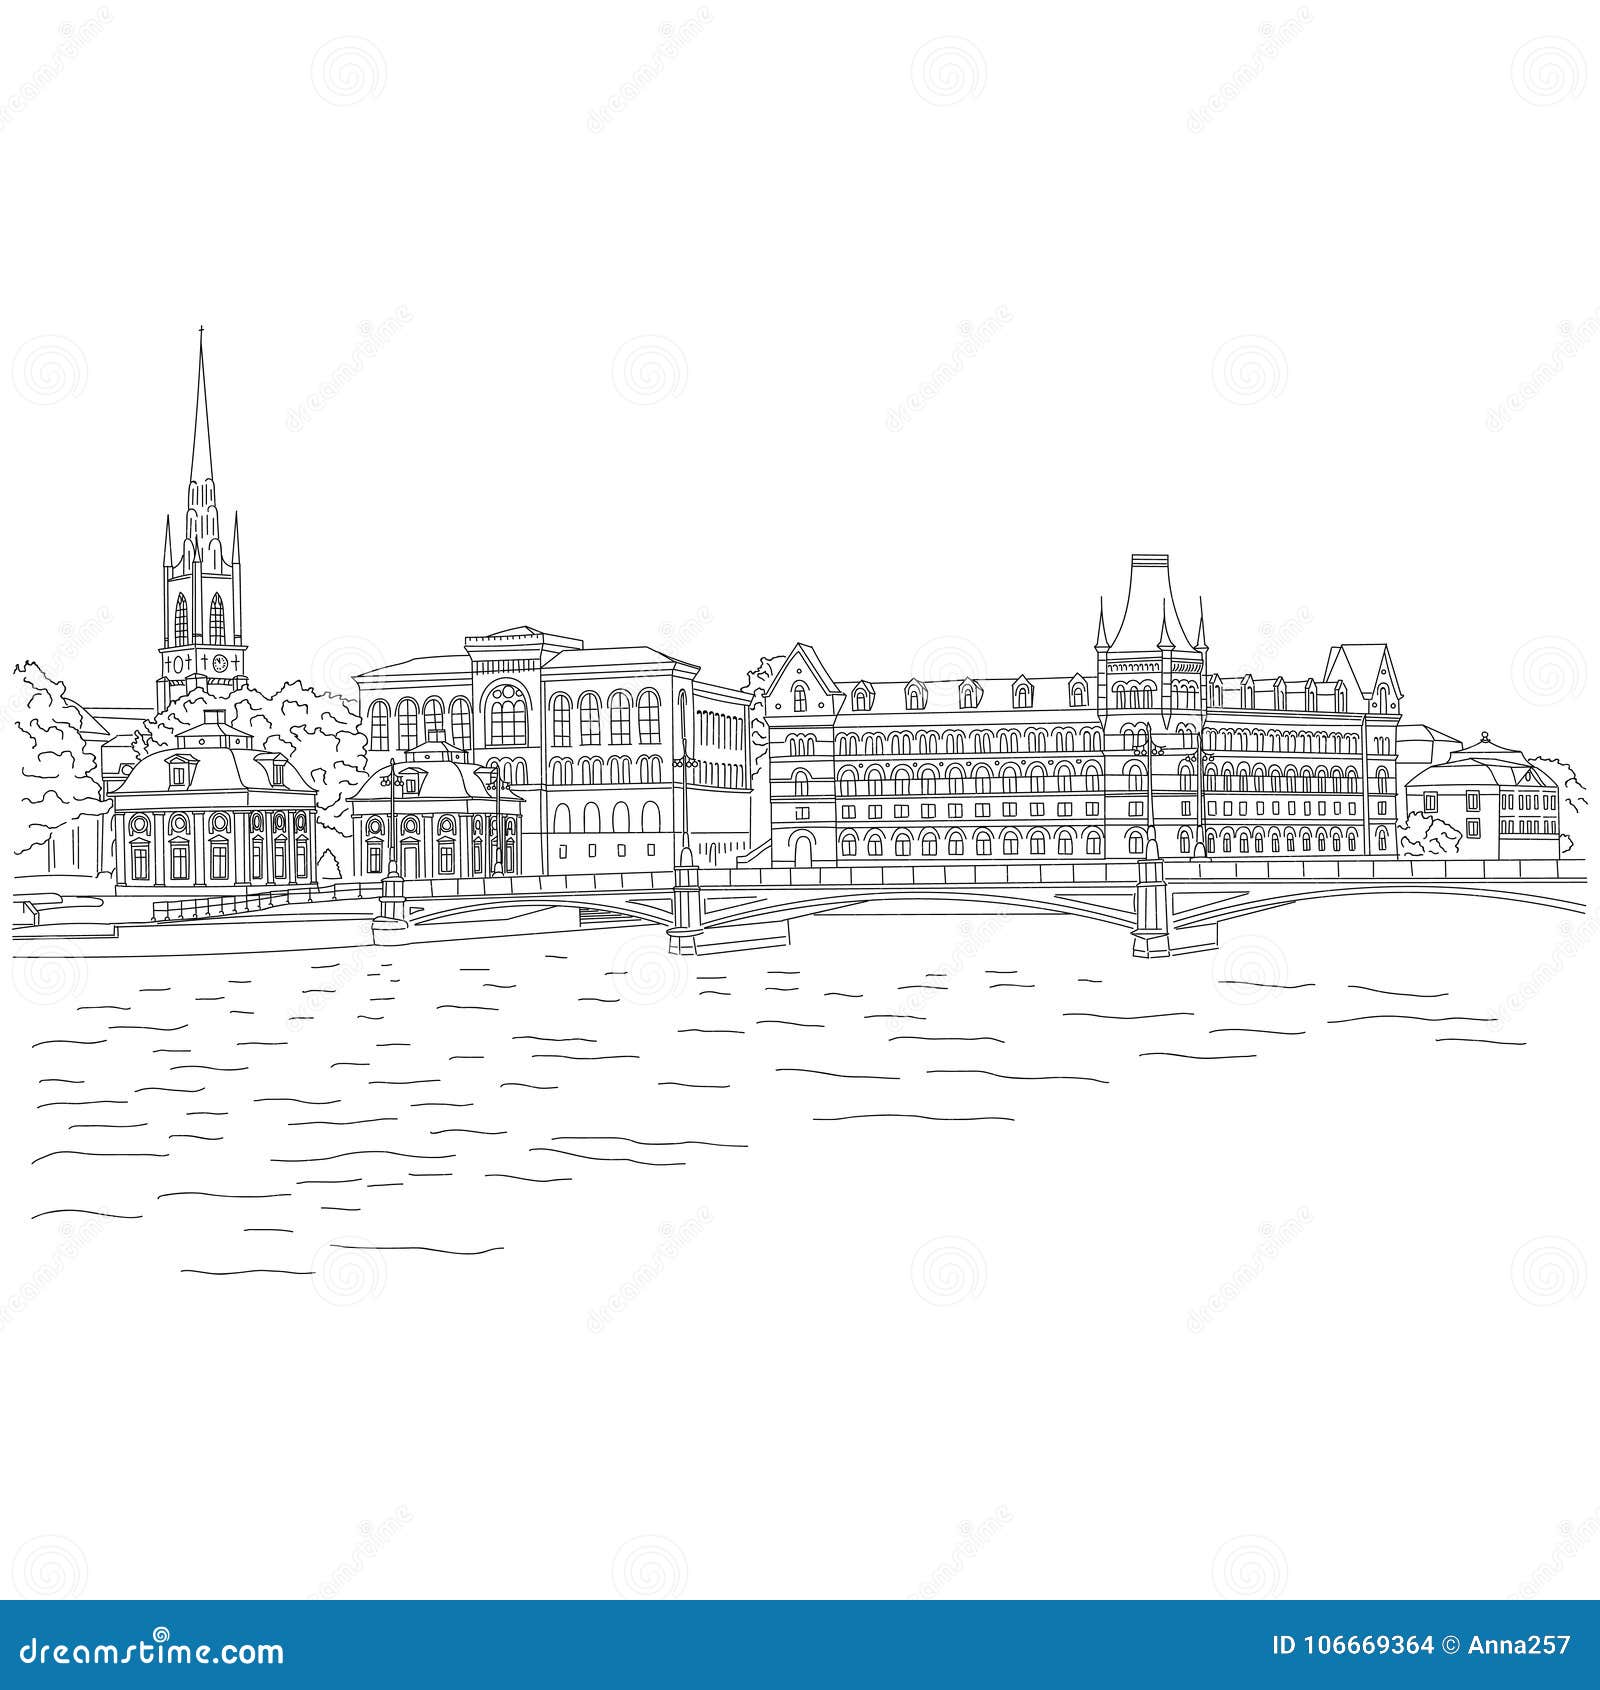 Businessman drawing city stock photo. Image of building - 104113408